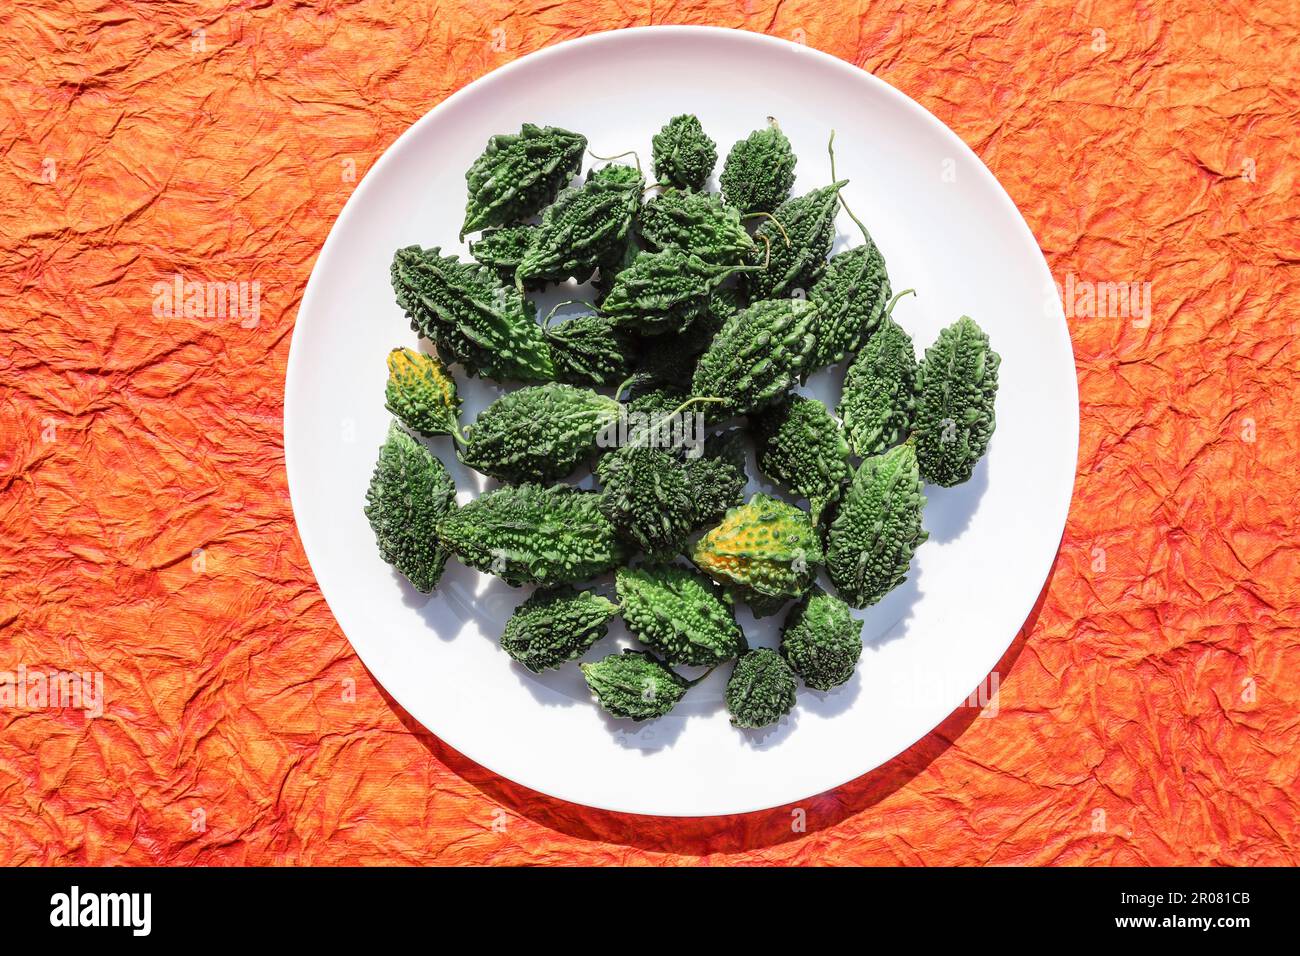 Top view of Karela Indian vegetable known as Bittermelons or Bittergourds Stock Photo